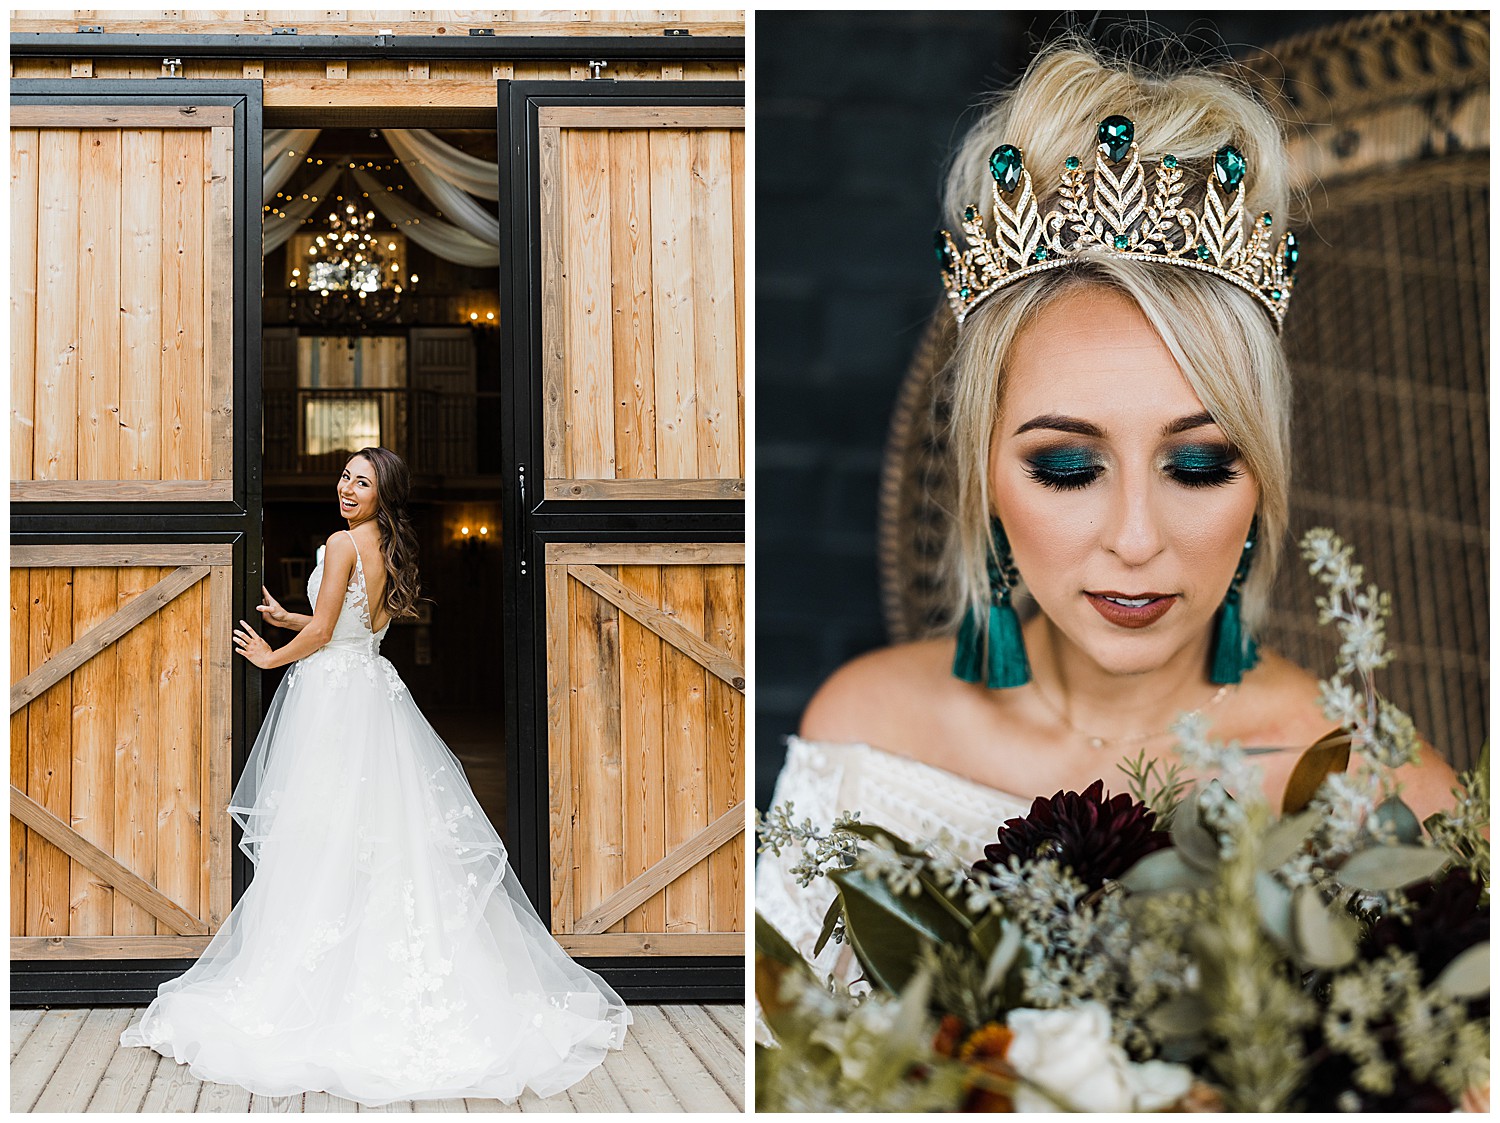 5 tips for your Dallas bridal session